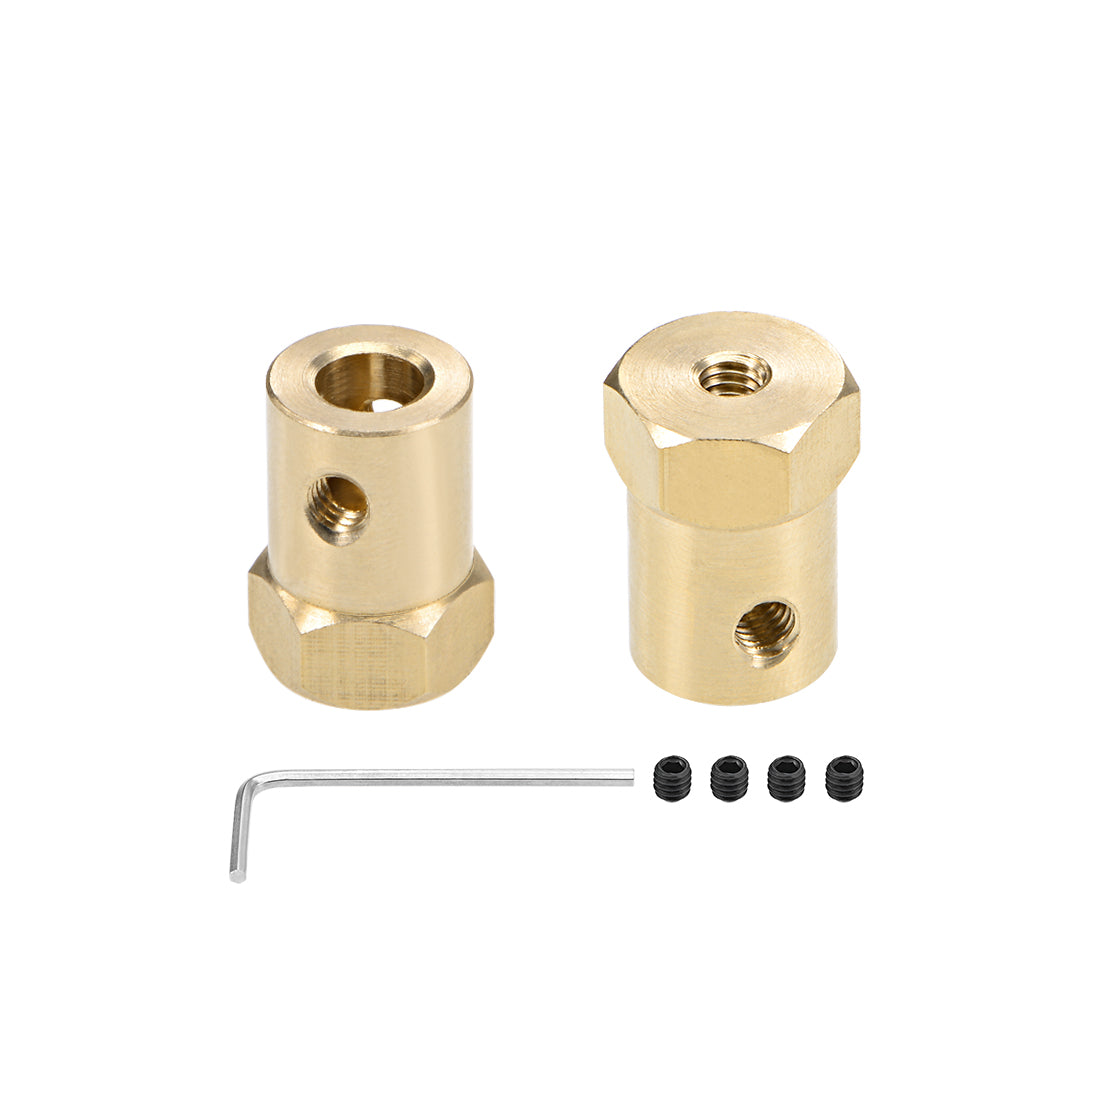 Uxcell Uxcell Hex Coupler 5mm Bore Motor Hex Brass Shaft Coupling Flexible Connector for Car Wheels Tires Shaft Motor 2pcs